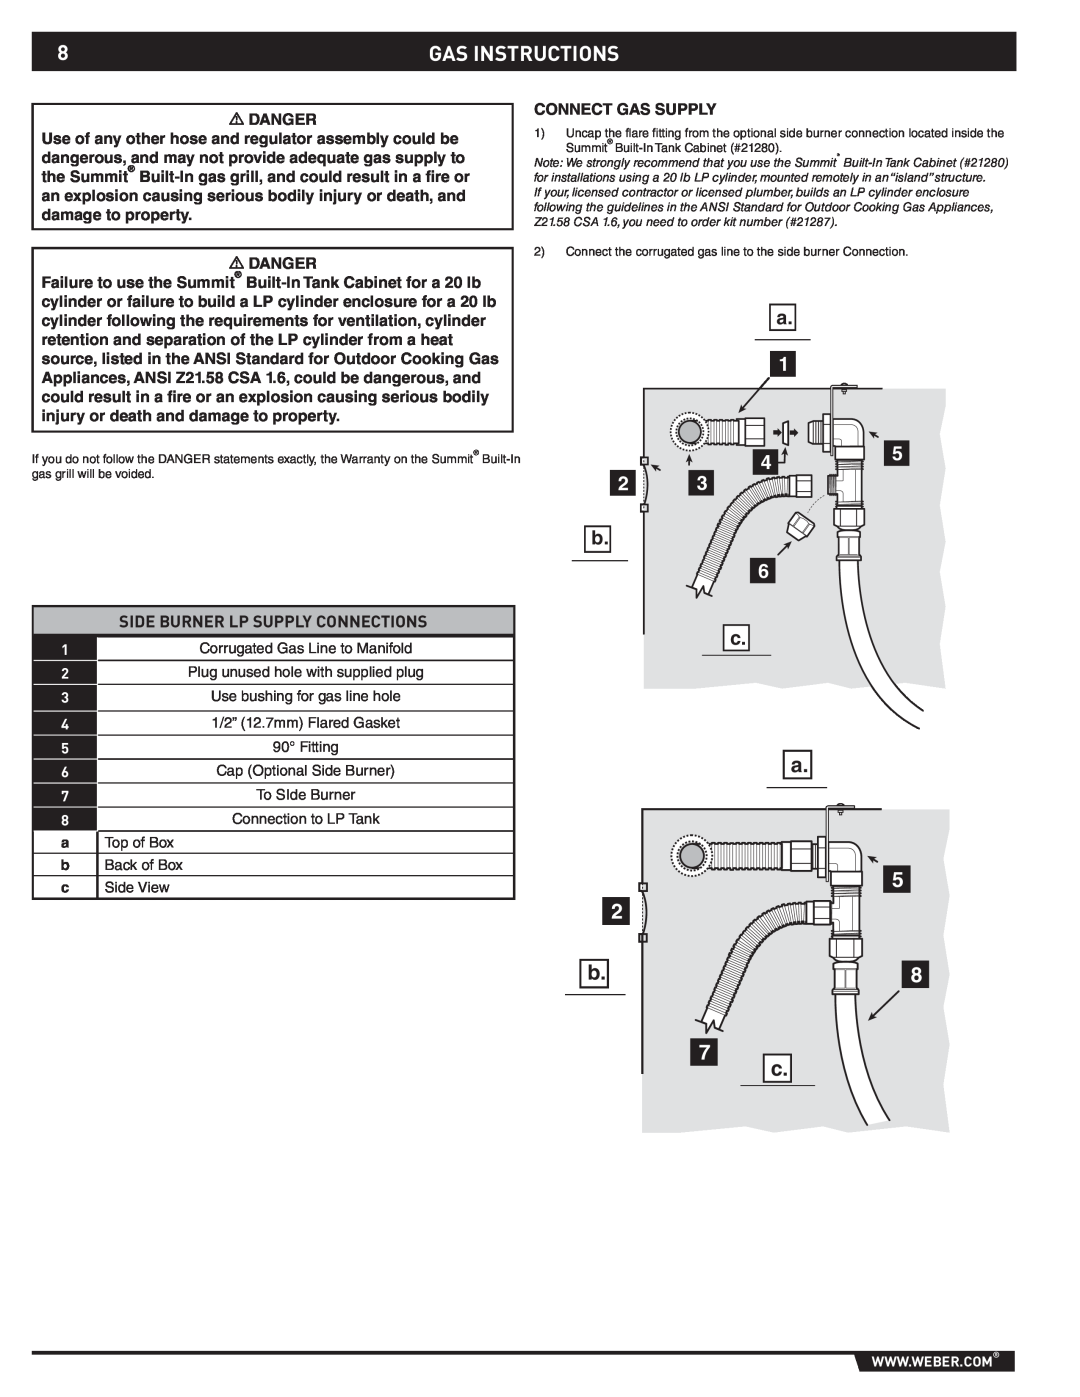 Weber 89796 manual Gas Instructions, Side Burner Lp Supply Connections 